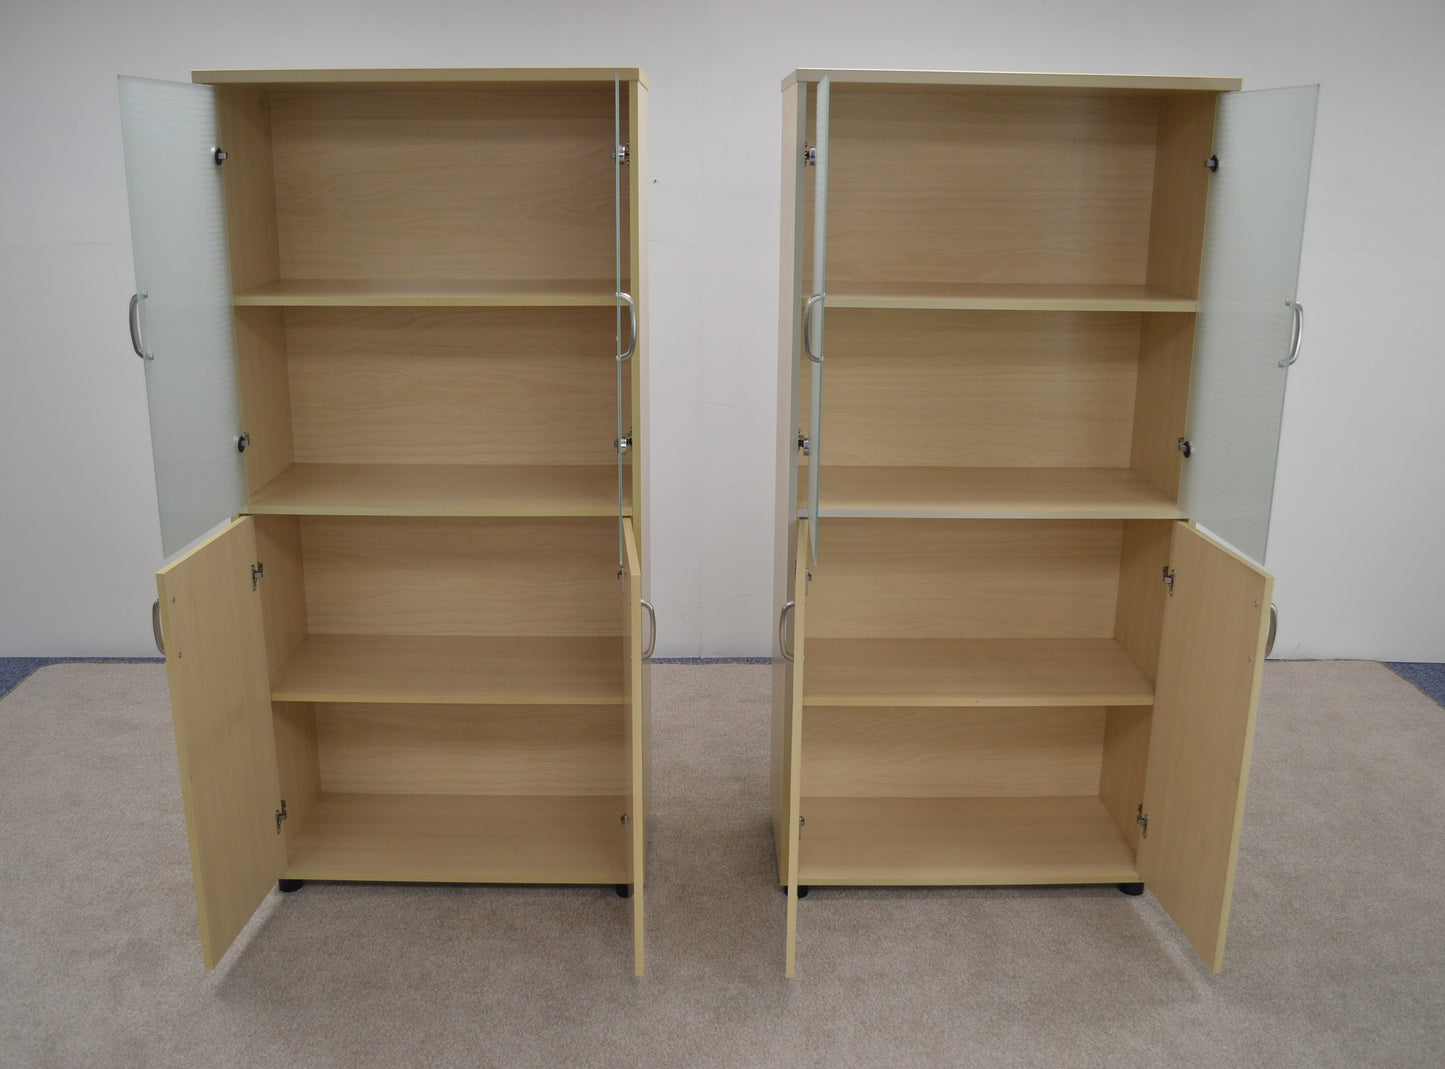 Two Filing/Storage Cabinets